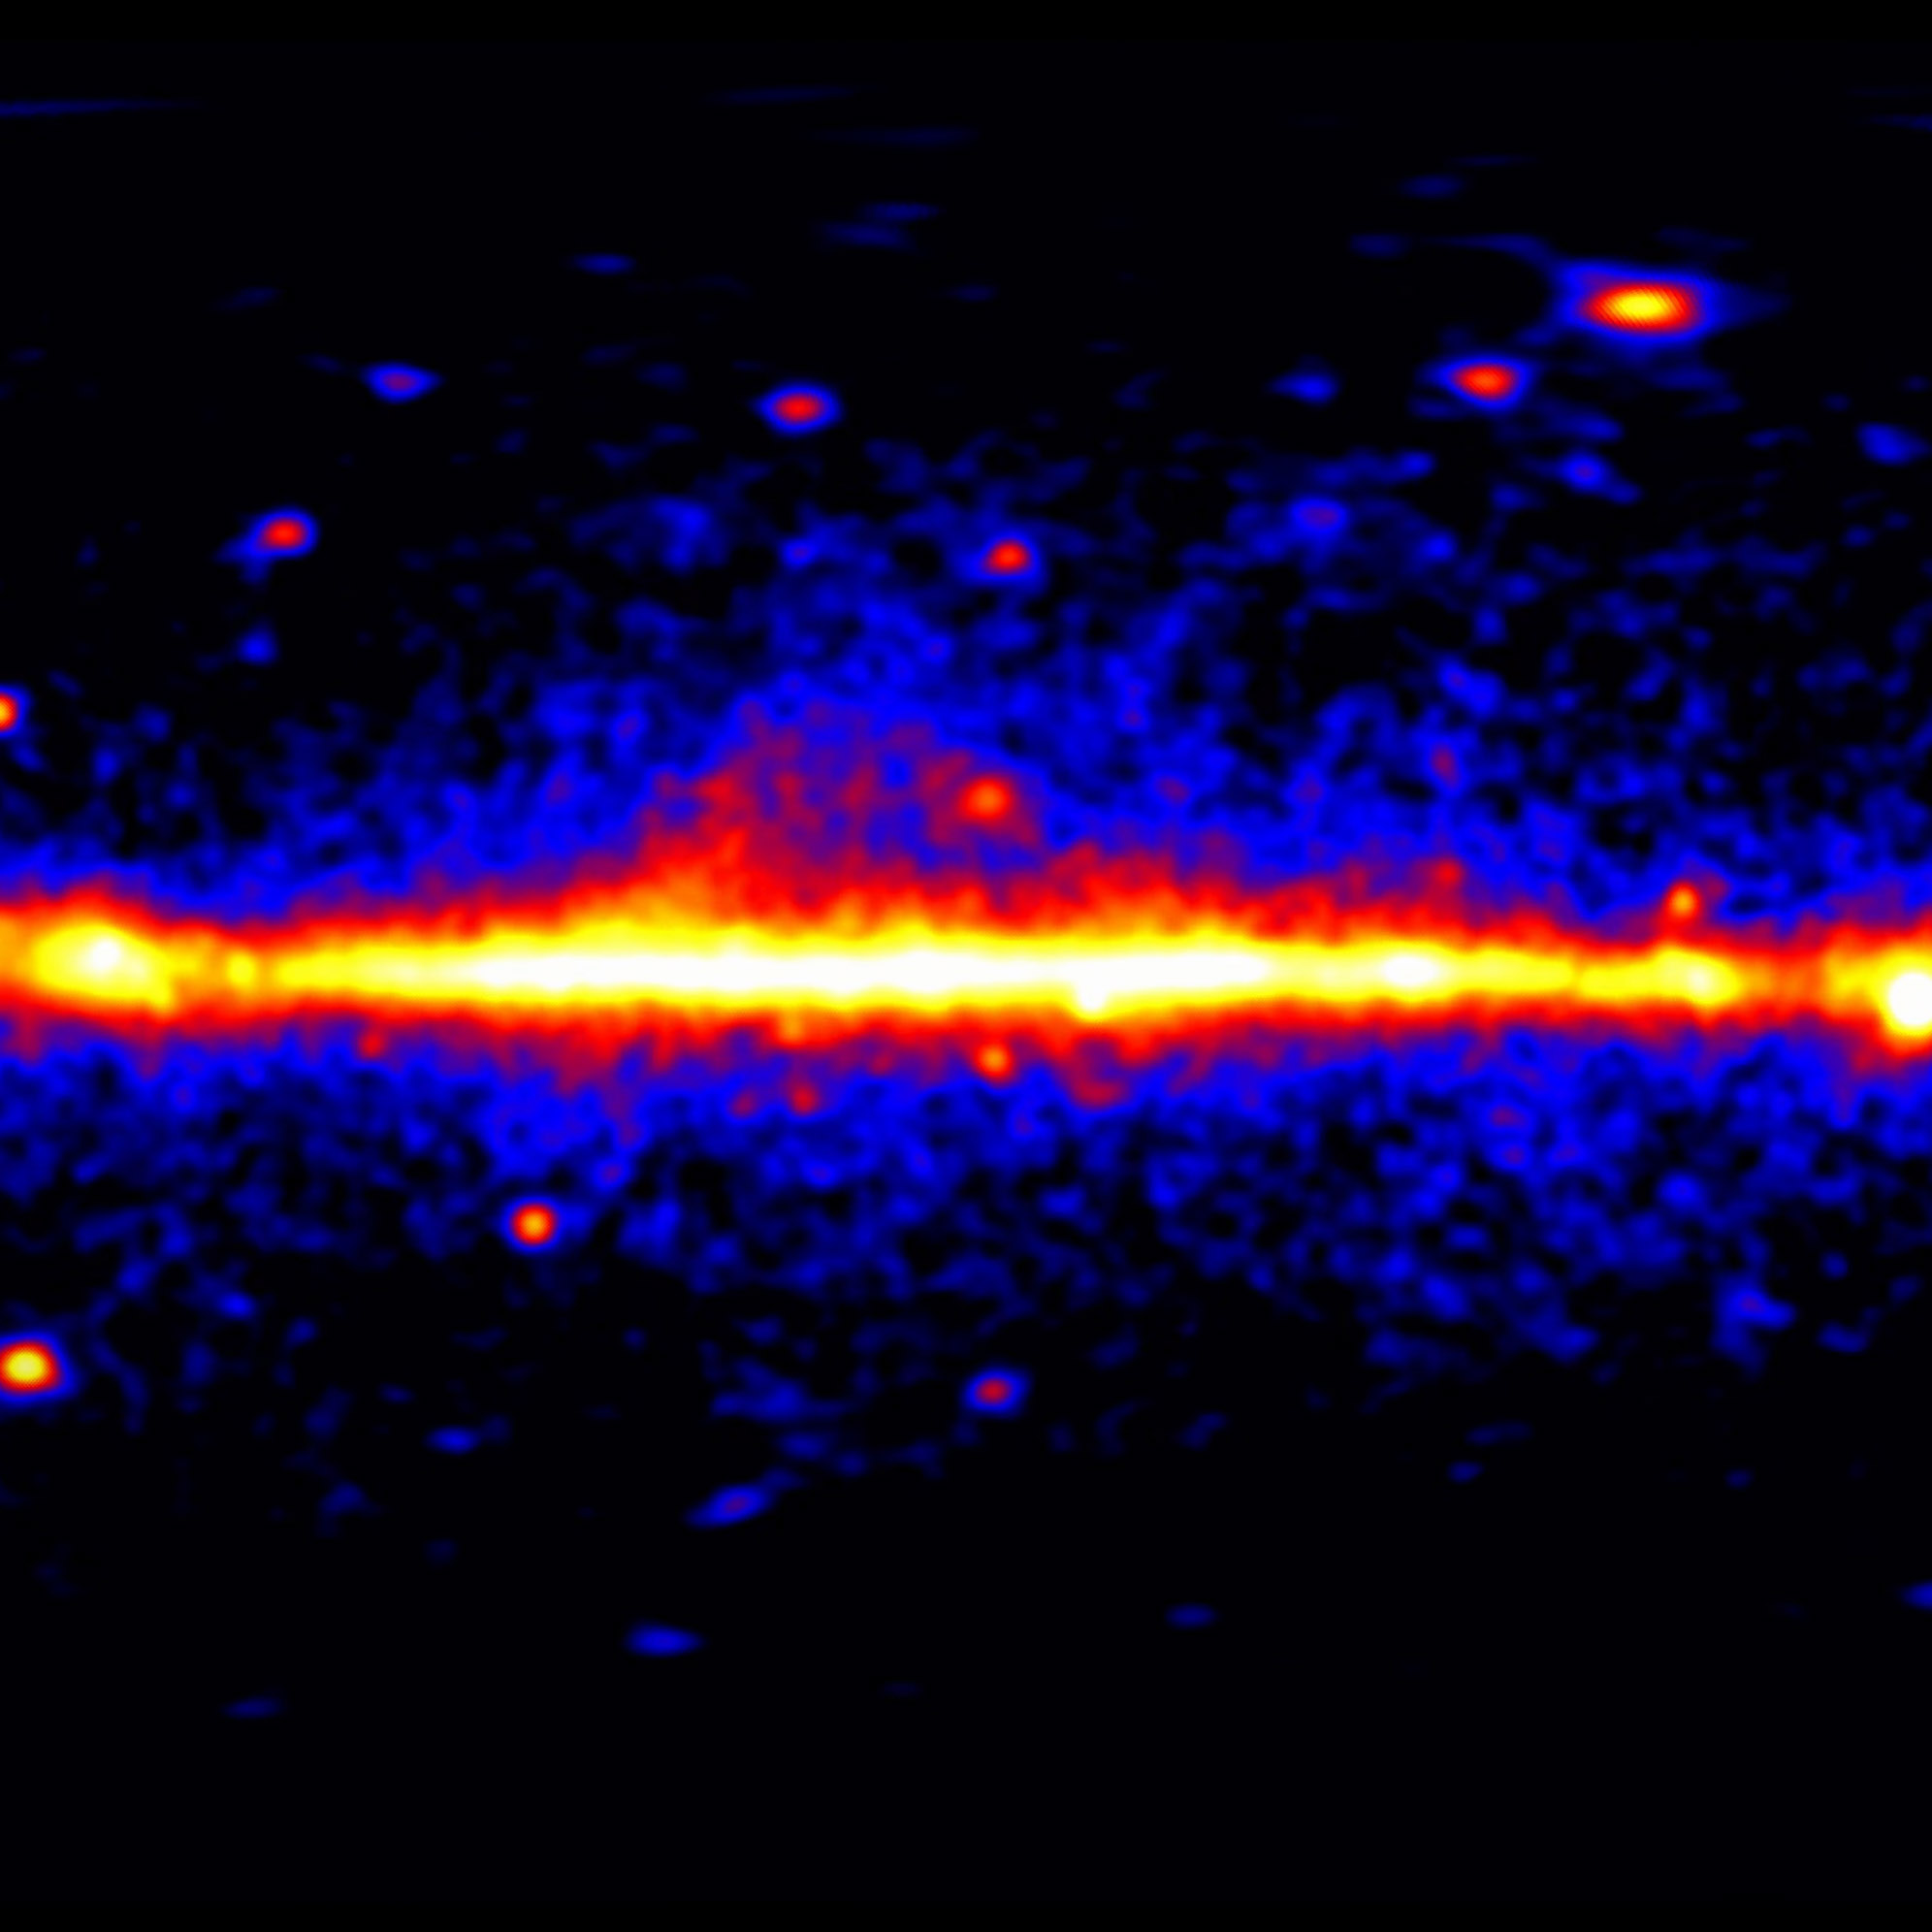 NASA’s Fermi Mission Creates 14-Year Time-Lapse of the Gamma-Ray Sky